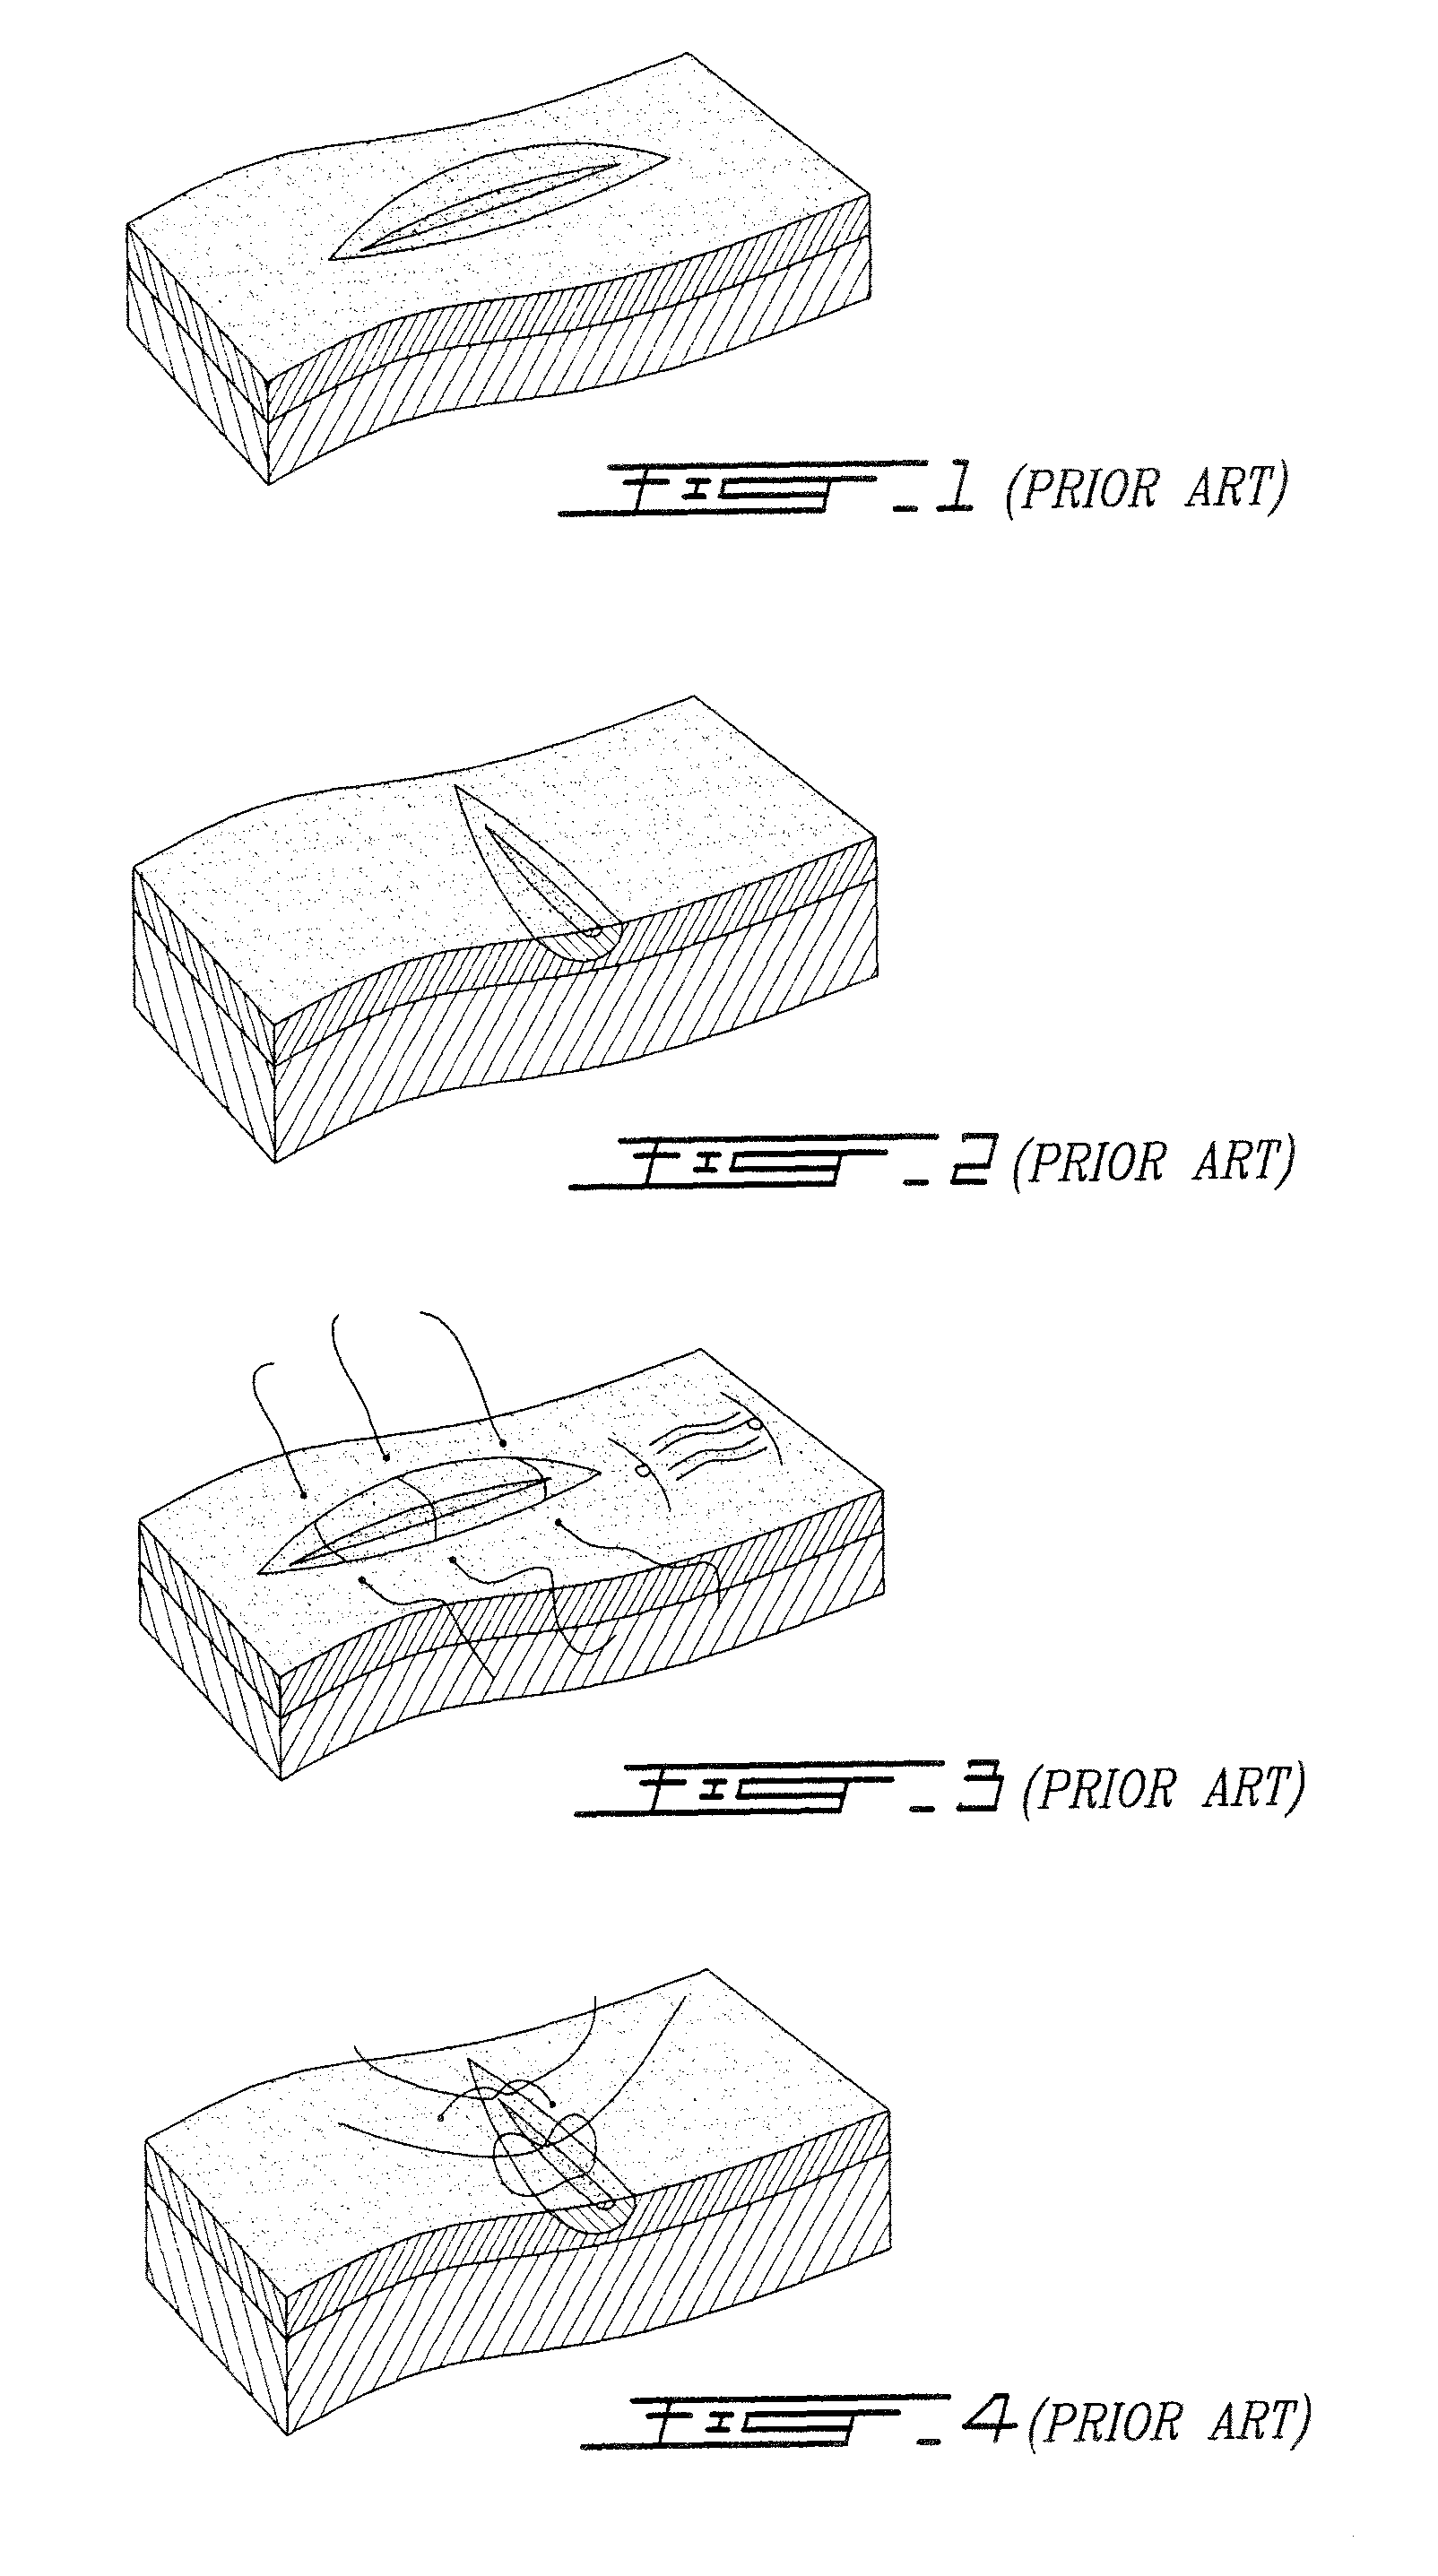 Biodegradable suture clip for joining bodily soft tissue